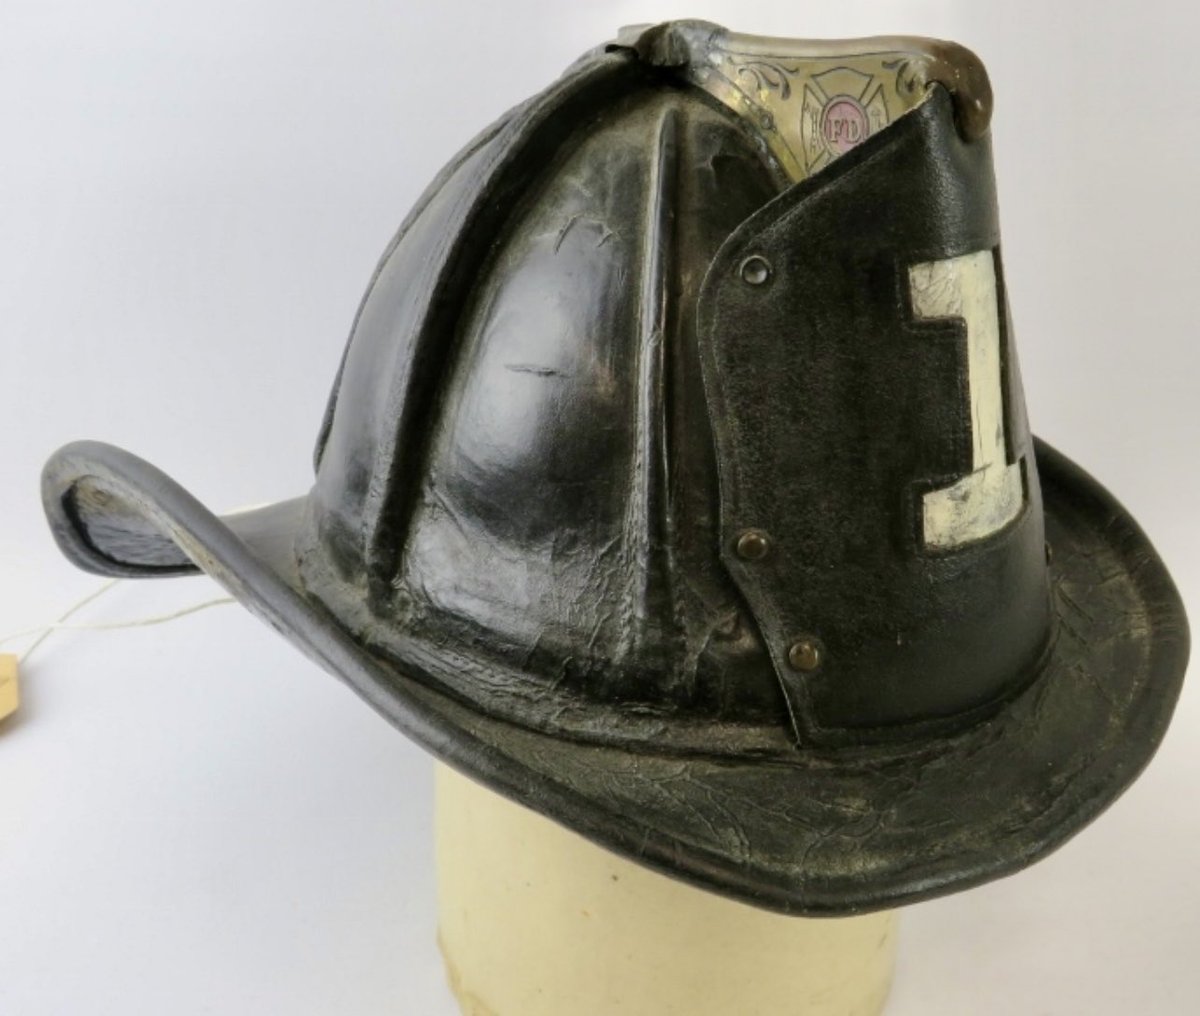 Bentleys are proud to announce that we will be Auctioning The Jack Field Collection of Fire Helmets on Wednesday 15th May 2024 Bentleysfineartauctioneers.co.uk #firehelmets #jackfield #auction